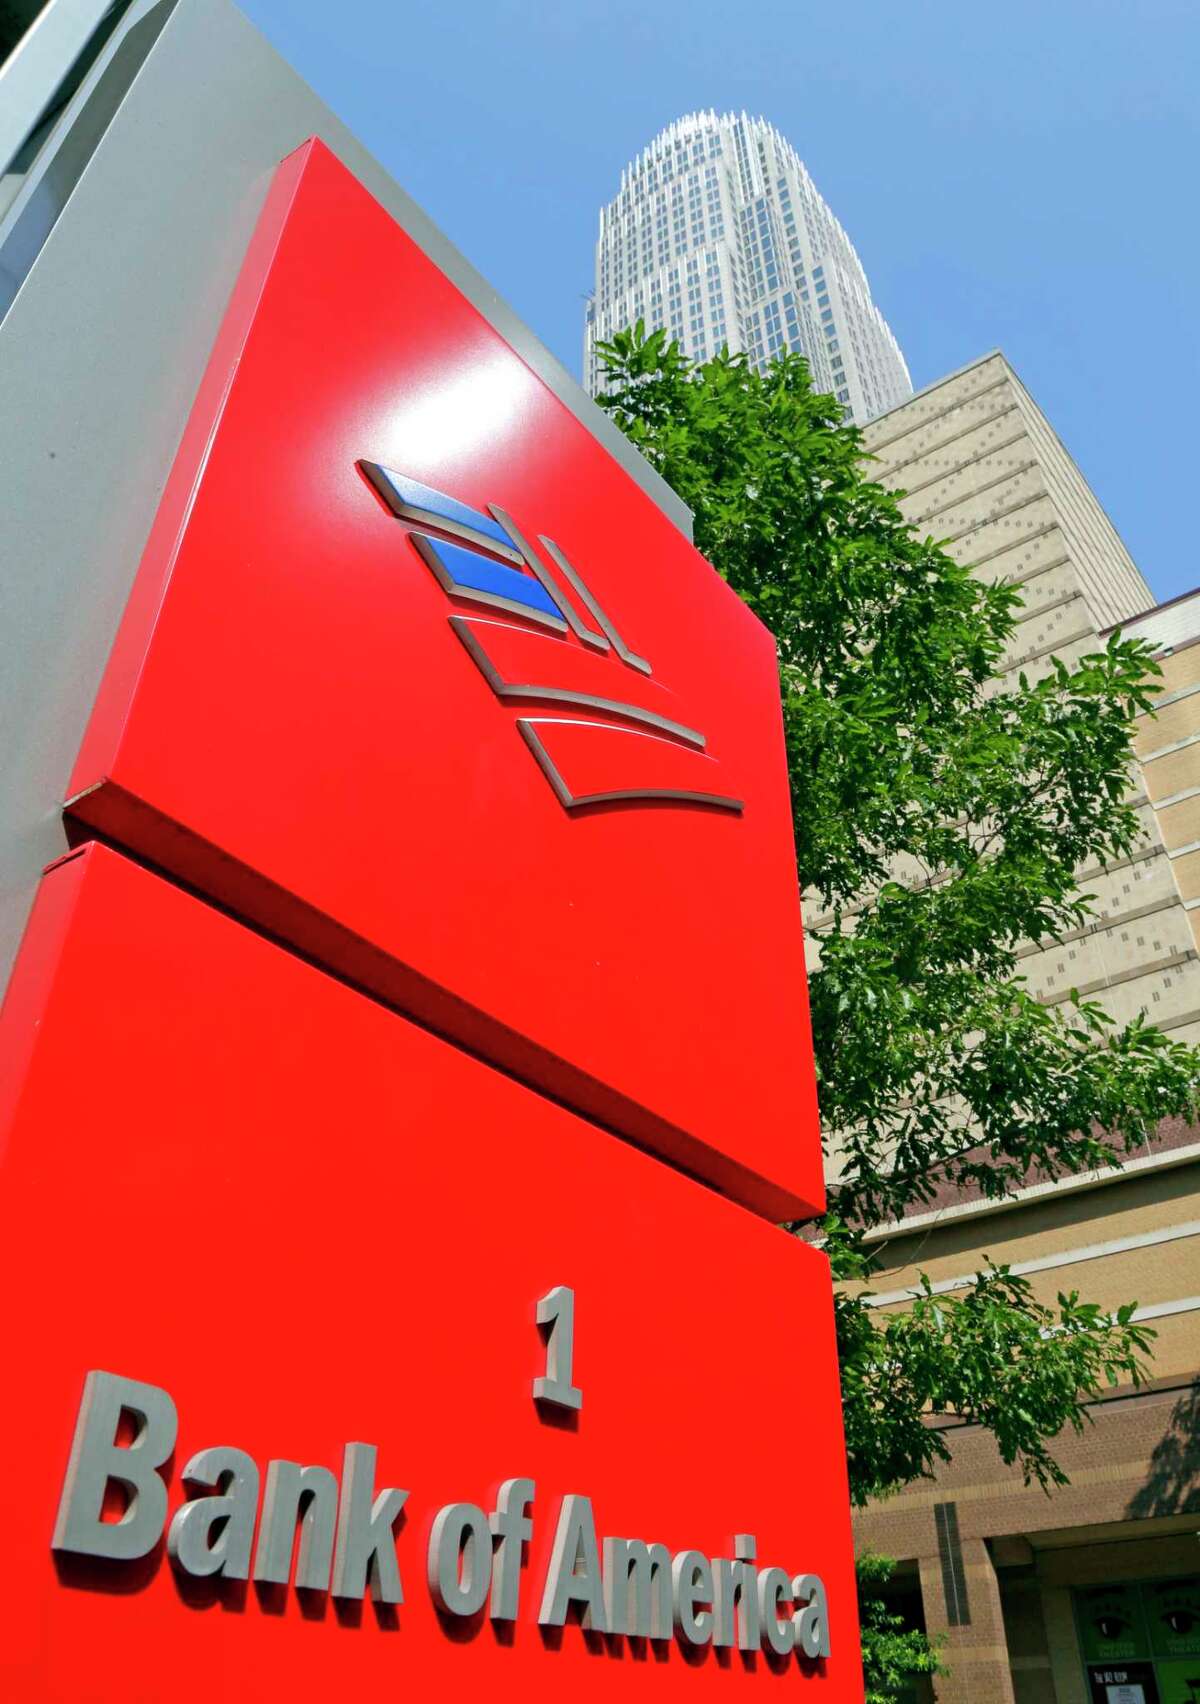 FILE - This Tuesday, July 7, 2015, file photo, shows Bank of America's corporate headquarters in Charlotte, N.C. Buffett's Berkshire Hathaway is buying 700 million shares in Bank of America, making Buffett the largest shareholder in two of the nation's largest banks. (AP Photo/Chuck Burton, File)